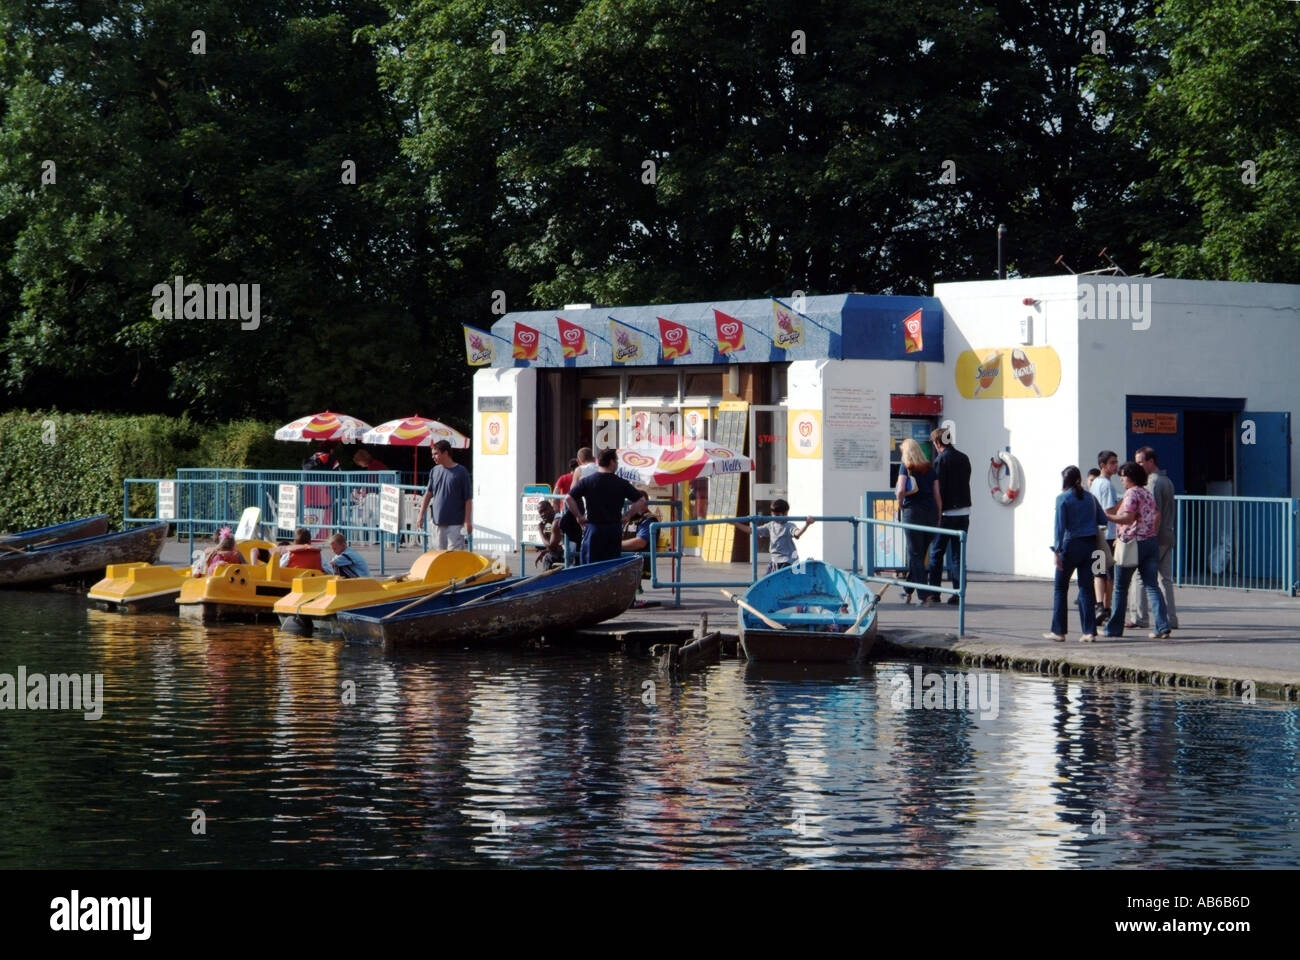 england london haringey muswell hill alexandra palace the highest point of north london the boating lake Stock Photo